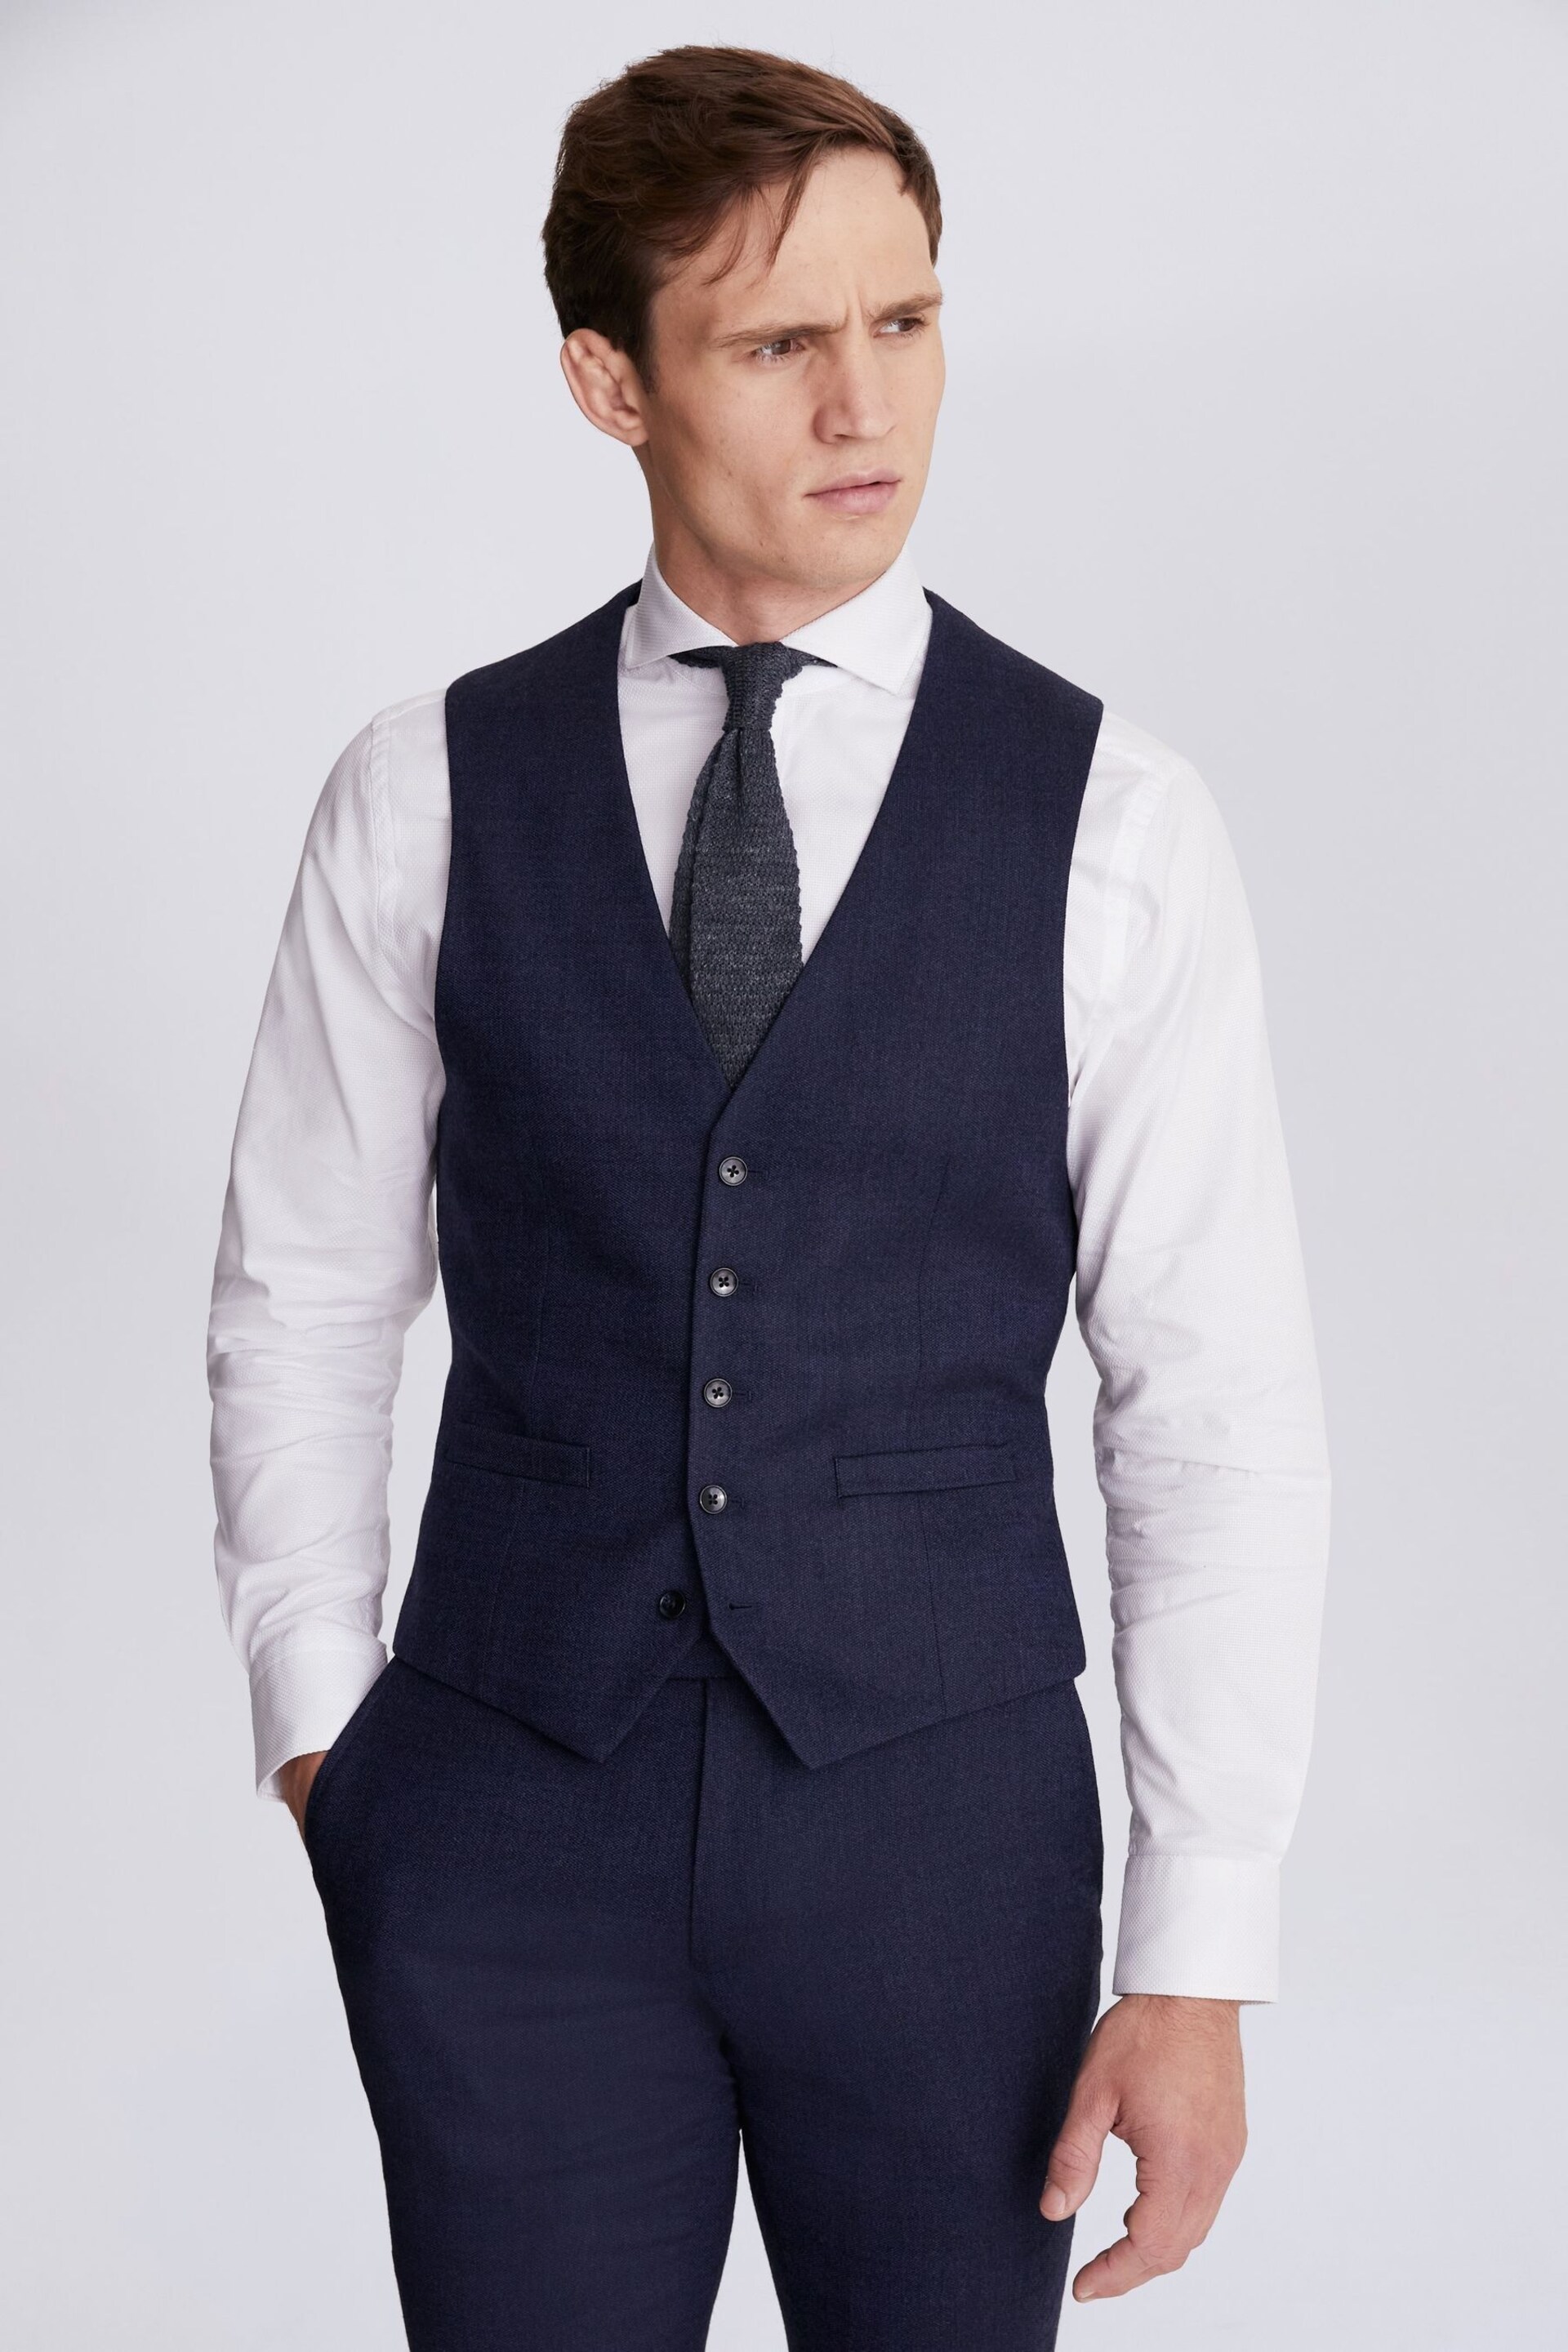 MOSS Blue Slim Fit Twisted Suit Waistcoat - Image 1 of 3